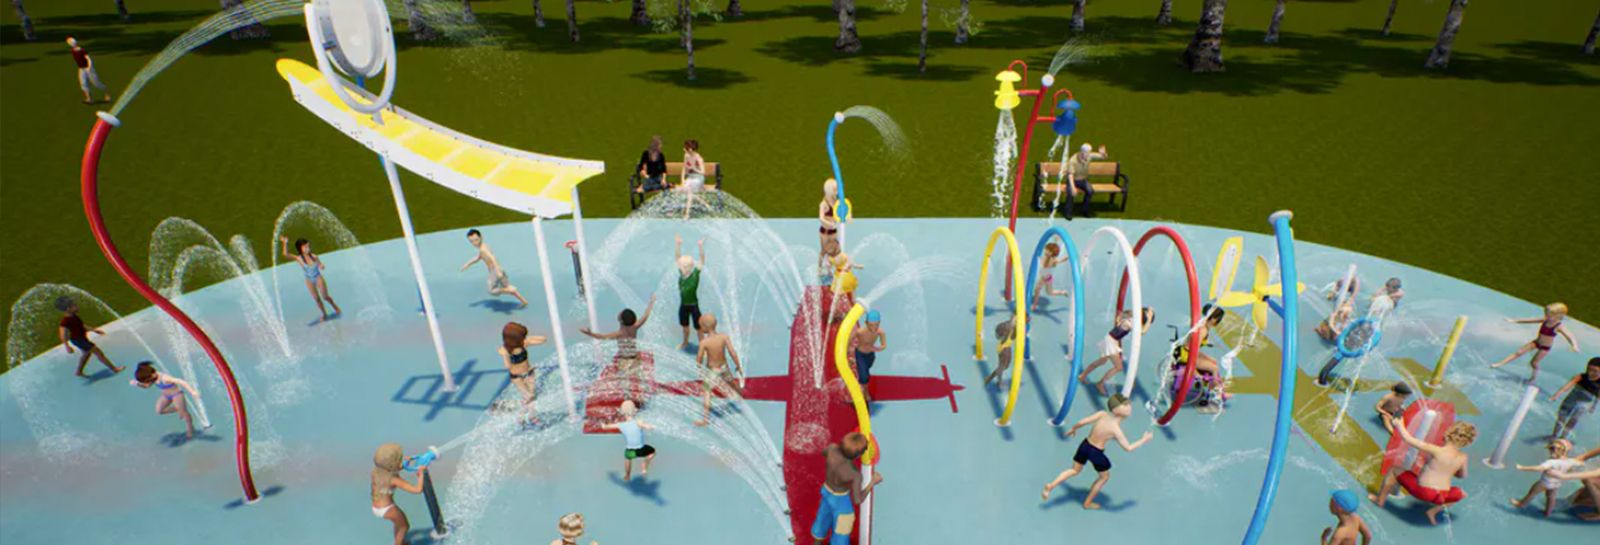 An artists impression of Stante Reserve Waterplay Park banner image